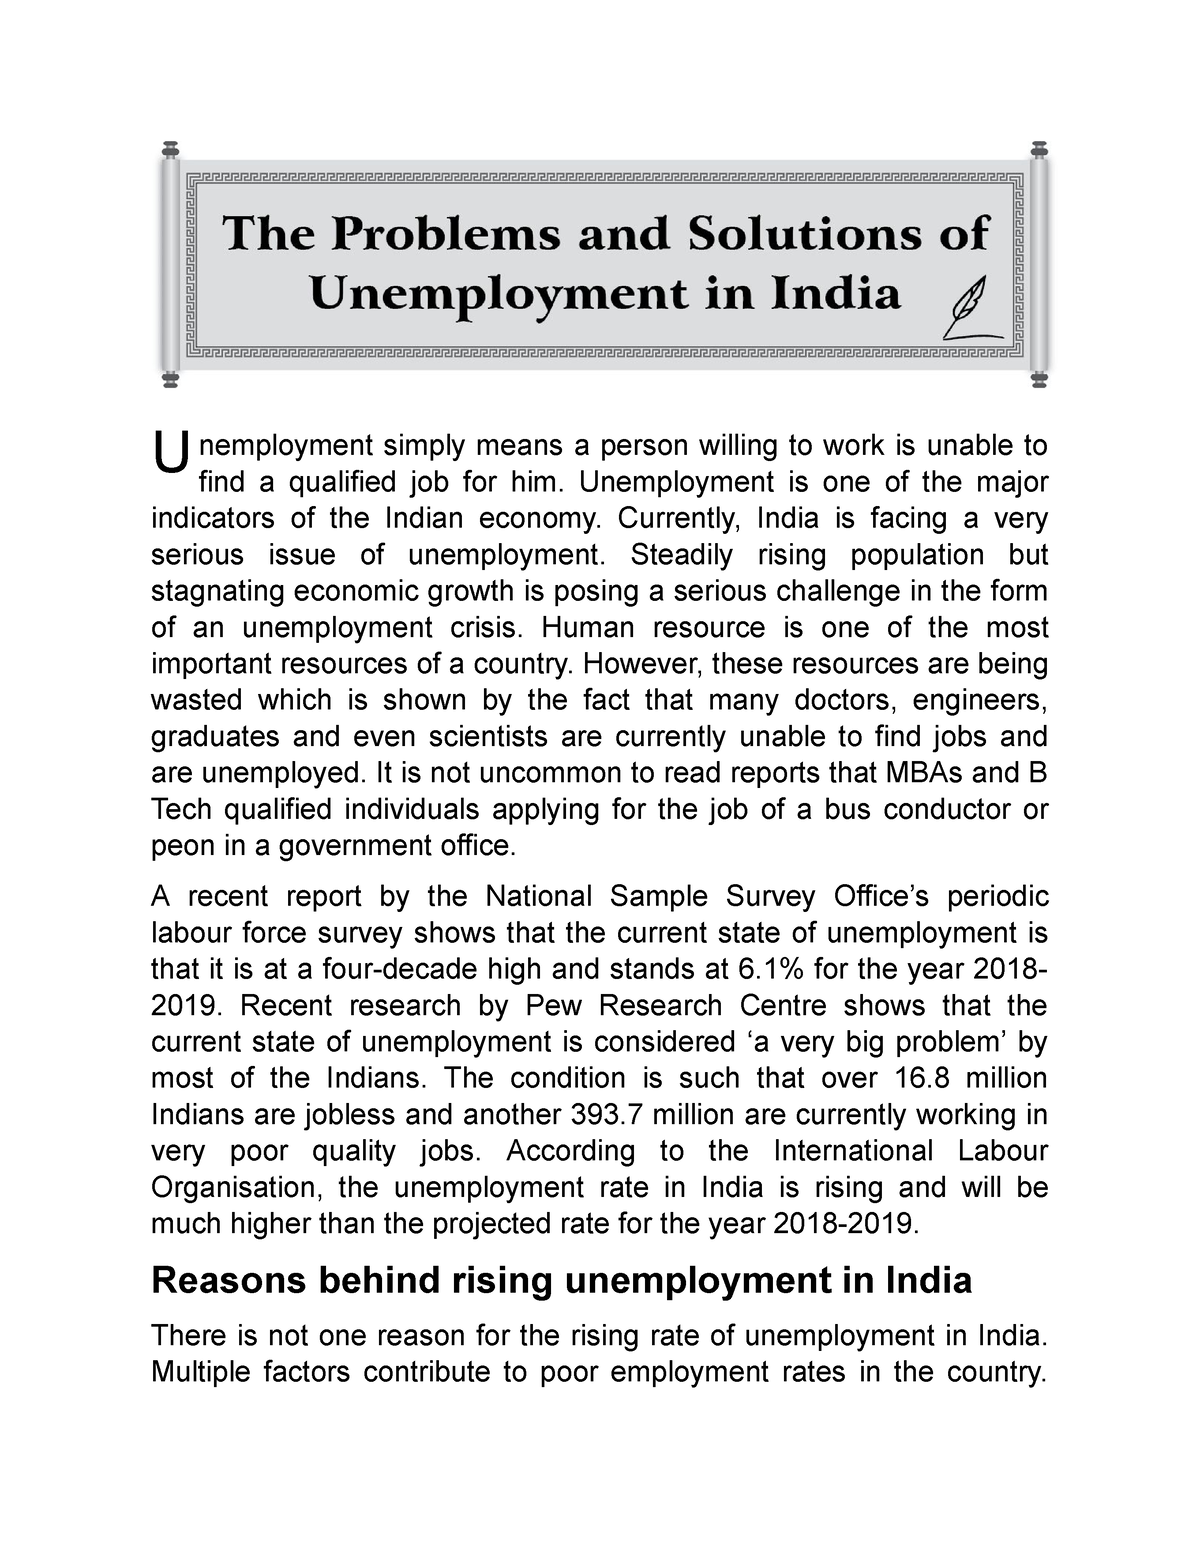 the problem of unemployment in india essay 250 words